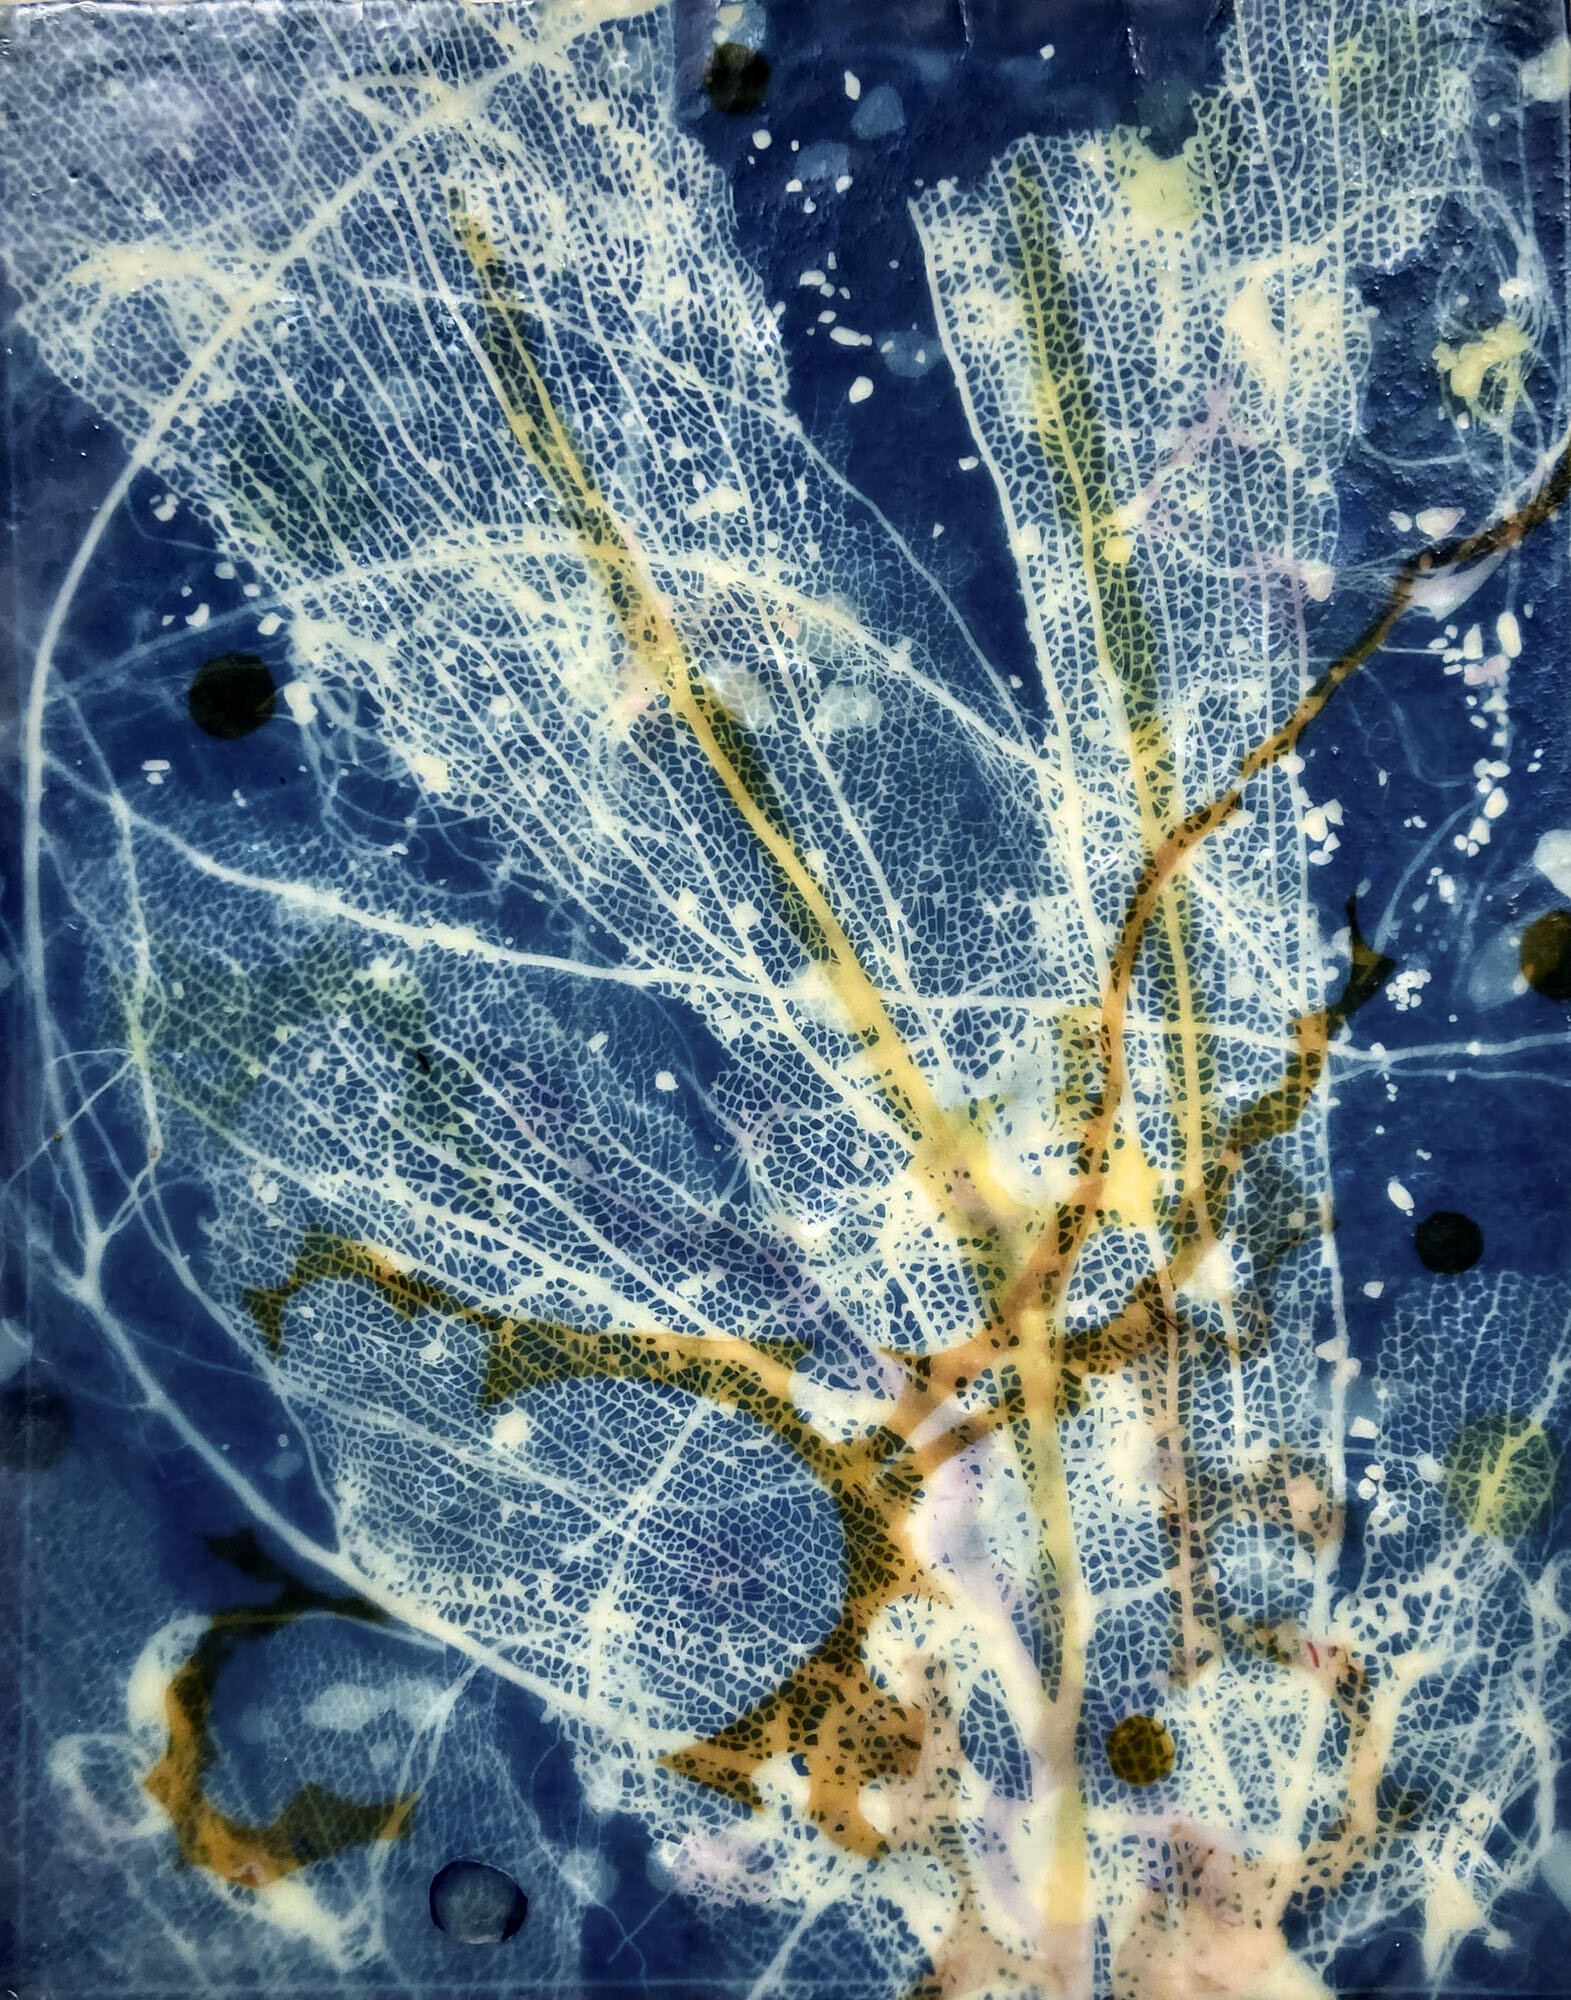   Tobago Coral Sea III, 2020   Cyanotype on Japanese rice paper, colored Japanese rice papers, wax, encaustic board   11” x 14” 